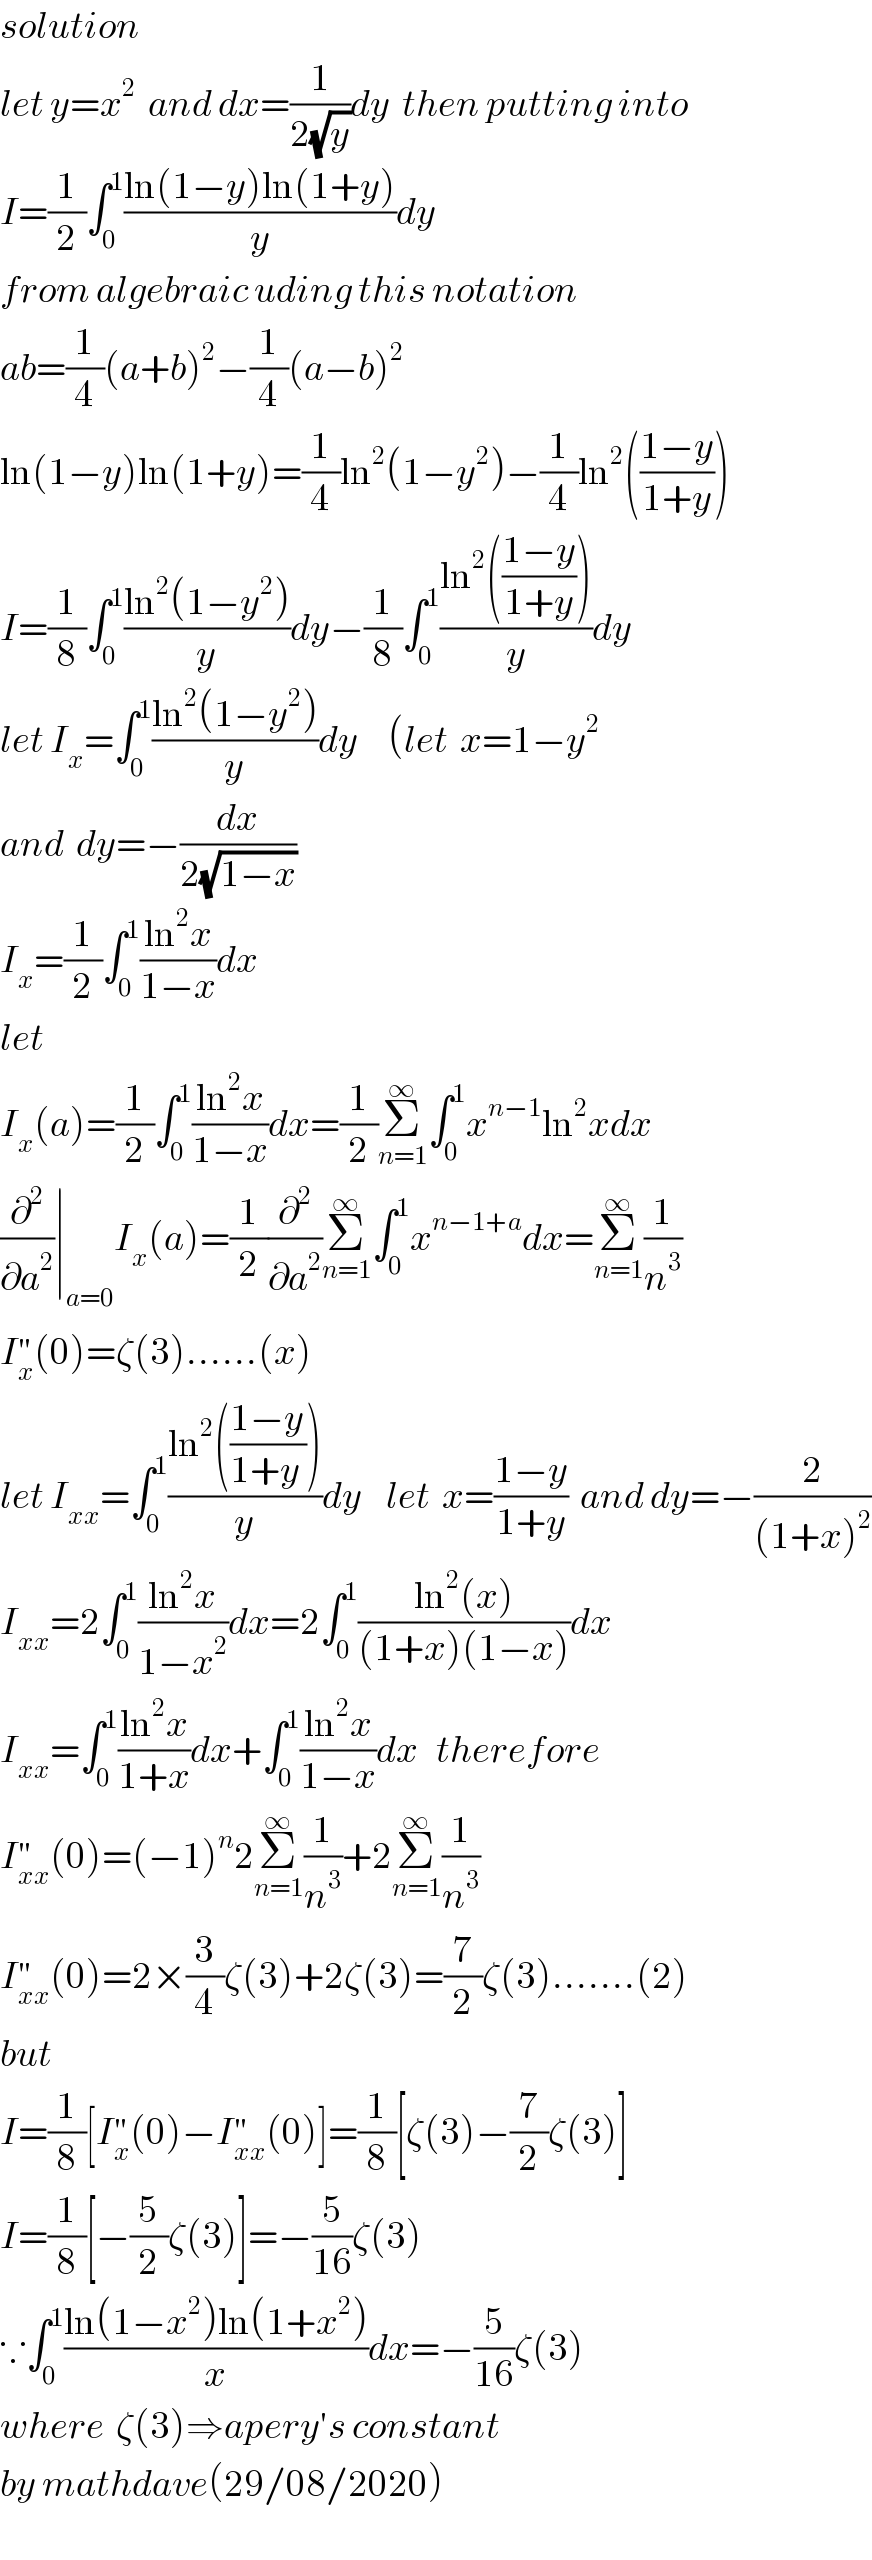 solution  let y=x^2   and dx=(1/(2(√y)))dy  then putting into  I=(1/2)∫_0 ^1 ((ln(1−y)ln(1+y))/y)dy  from algebraic uding this notation  ab=(1/4)(a+b)^2 −(1/4)(a−b)^2   ln(1−y)ln(1+y)=(1/4)ln^2 (1−y^2 )−(1/4)ln^2 (((1−y)/(1+y)))  I=(1/8)∫_0 ^1 ((ln^2 (1−y^2 ))/y)dy−(1/8)∫_0 ^1 ((ln^2 (((1−y)/(1+y))))/y)dy  let I_x =∫_0 ^1 ((ln^2 (1−y^2 ))/y)dy     (let  x=1−y^2    and  dy=−(dx/(2(√(1−x))))  I_x =(1/2)∫_0 ^1 ((ln^2 x)/(1−x))dx  let   I_x (a)=(1/2)∫_0 ^1 ((ln^2 x)/(1−x))dx=(1/2)Σ_(n=1) ^∞ ∫_0 ^1 x^(n−1) ln^2 xdx  (∂^2 /∂a^2 )∣_(a=0) I_x (a)=(1/2)(∂^2 /∂a^2 )Σ_(n=1) ^∞ ∫_0 ^1 x^(n−1+a) dx=Σ_(n=1) ^∞ (1/n^3 )  I_x ^(′′) (0)=ζ(3)......(x)   let I_(xx) =∫_0 ^1 ((ln^2 (((1−y)/(1+y ))))/y)dy    let  x=((1−y)/(1+y))  and dy=−(2/((1+x)^2 ))  I_(xx) =2∫_0 ^1 ((ln^2 x)/(1−x^2 ))dx=2∫_0 ^1 ((ln^2 (x))/((1+x)(1−x)))dx  I_(xx) =∫_0 ^1 ((ln^2 x)/(1+x))dx+∫_0 ^1 ((ln^2 x)/(1−x))dx   therefore  I_(xx) ^(′′) (0)=(−1)^n 2Σ_(n=1) ^∞ (1/n^3 )+2Σ_(n=1) ^∞ (1/n^3 )  I_(xx) ^(′′) (0)=2×(3/4)ζ(3)+2ζ(3)=(7/2)ζ(3).......(2)  but  I=(1/8)[I_x ^(′′) (0)−I_(xx) ^(′′) (0)]=(1/8)[ζ(3)−(7/2)ζ(3)]  I=(1/8)[−(5/2)ζ(3)]=−(5/(16))ζ(3)  ∵∫_0 ^1 ((ln(1−x^2 )ln(1+x^2 ))/x)dx=−(5/(16))ζ(3)  where  ζ(3)⇒apery′s constant  by mathdave(29/08/2020)  